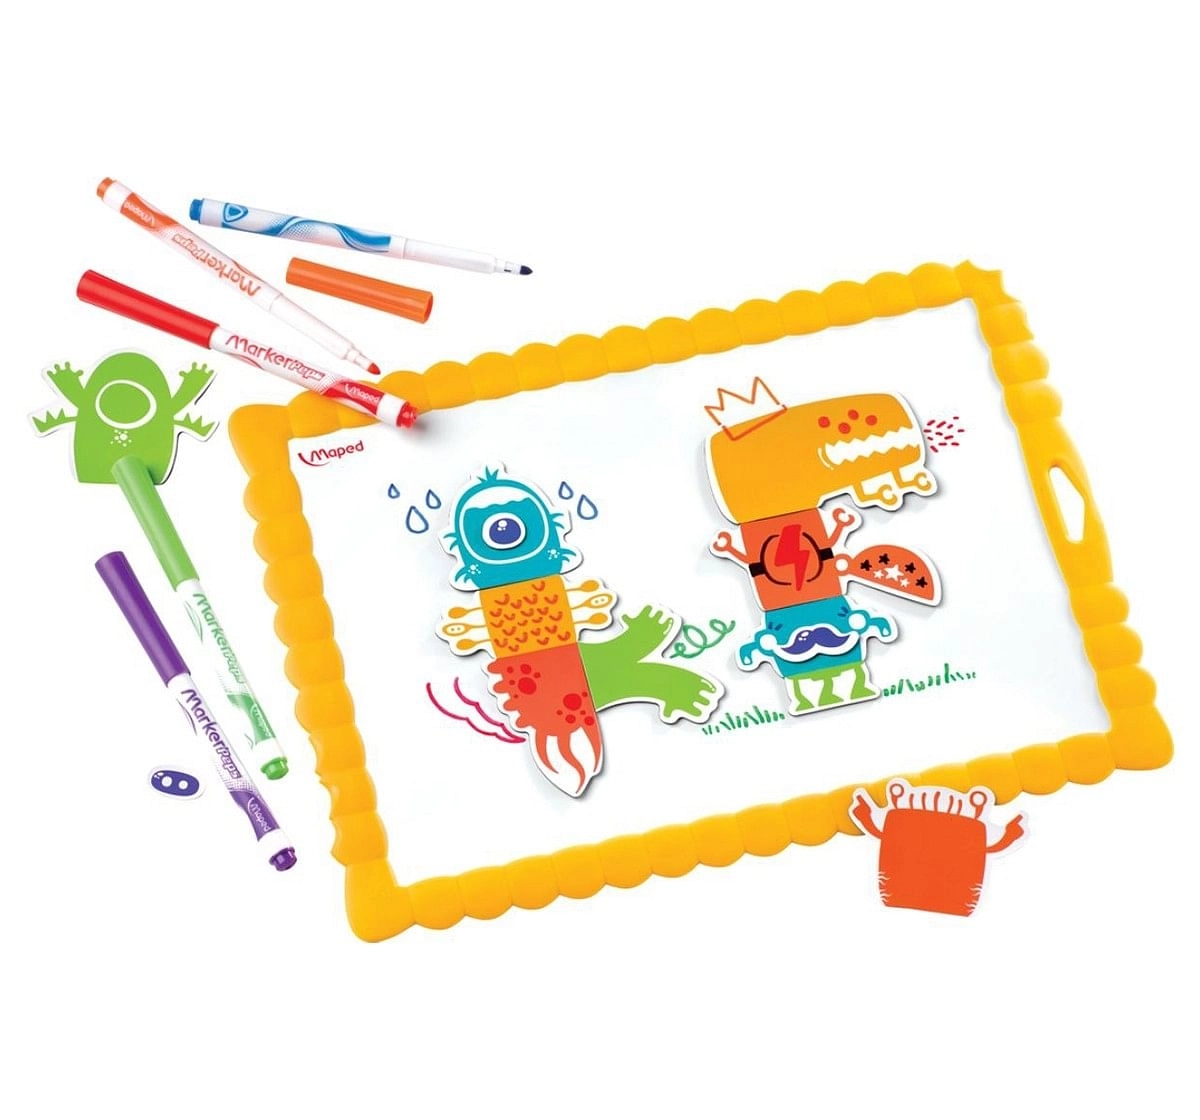 Maped Magnetic Erasable Creations, 7Y+ (Multicolour)